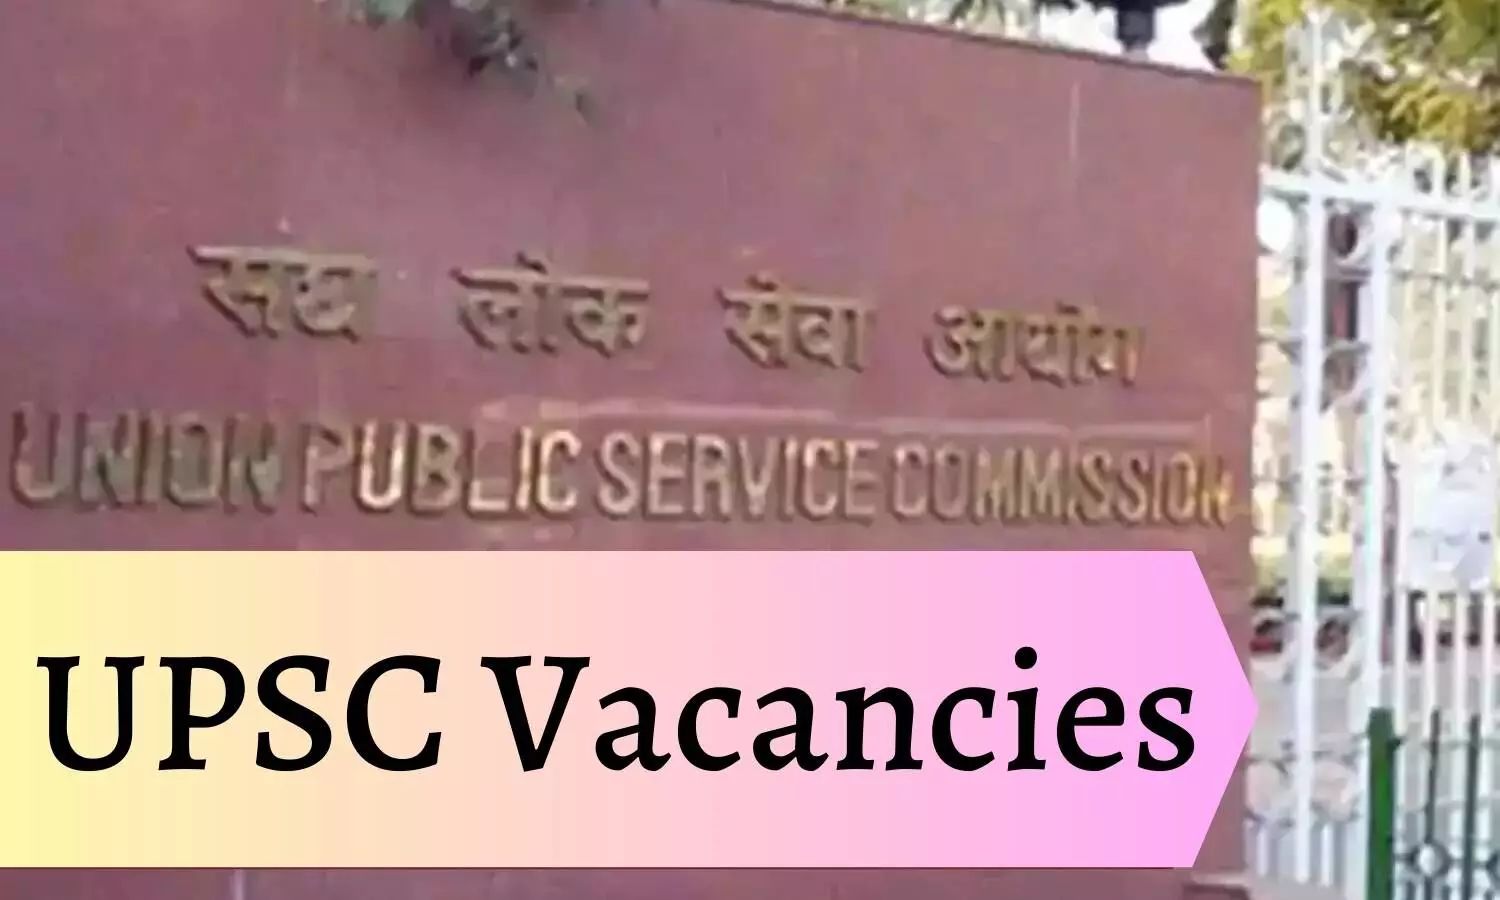 Release Yearly UPSC Vacancies for Regular Faculty Positions in Medical Colleges: Doctors Tell Health Minister